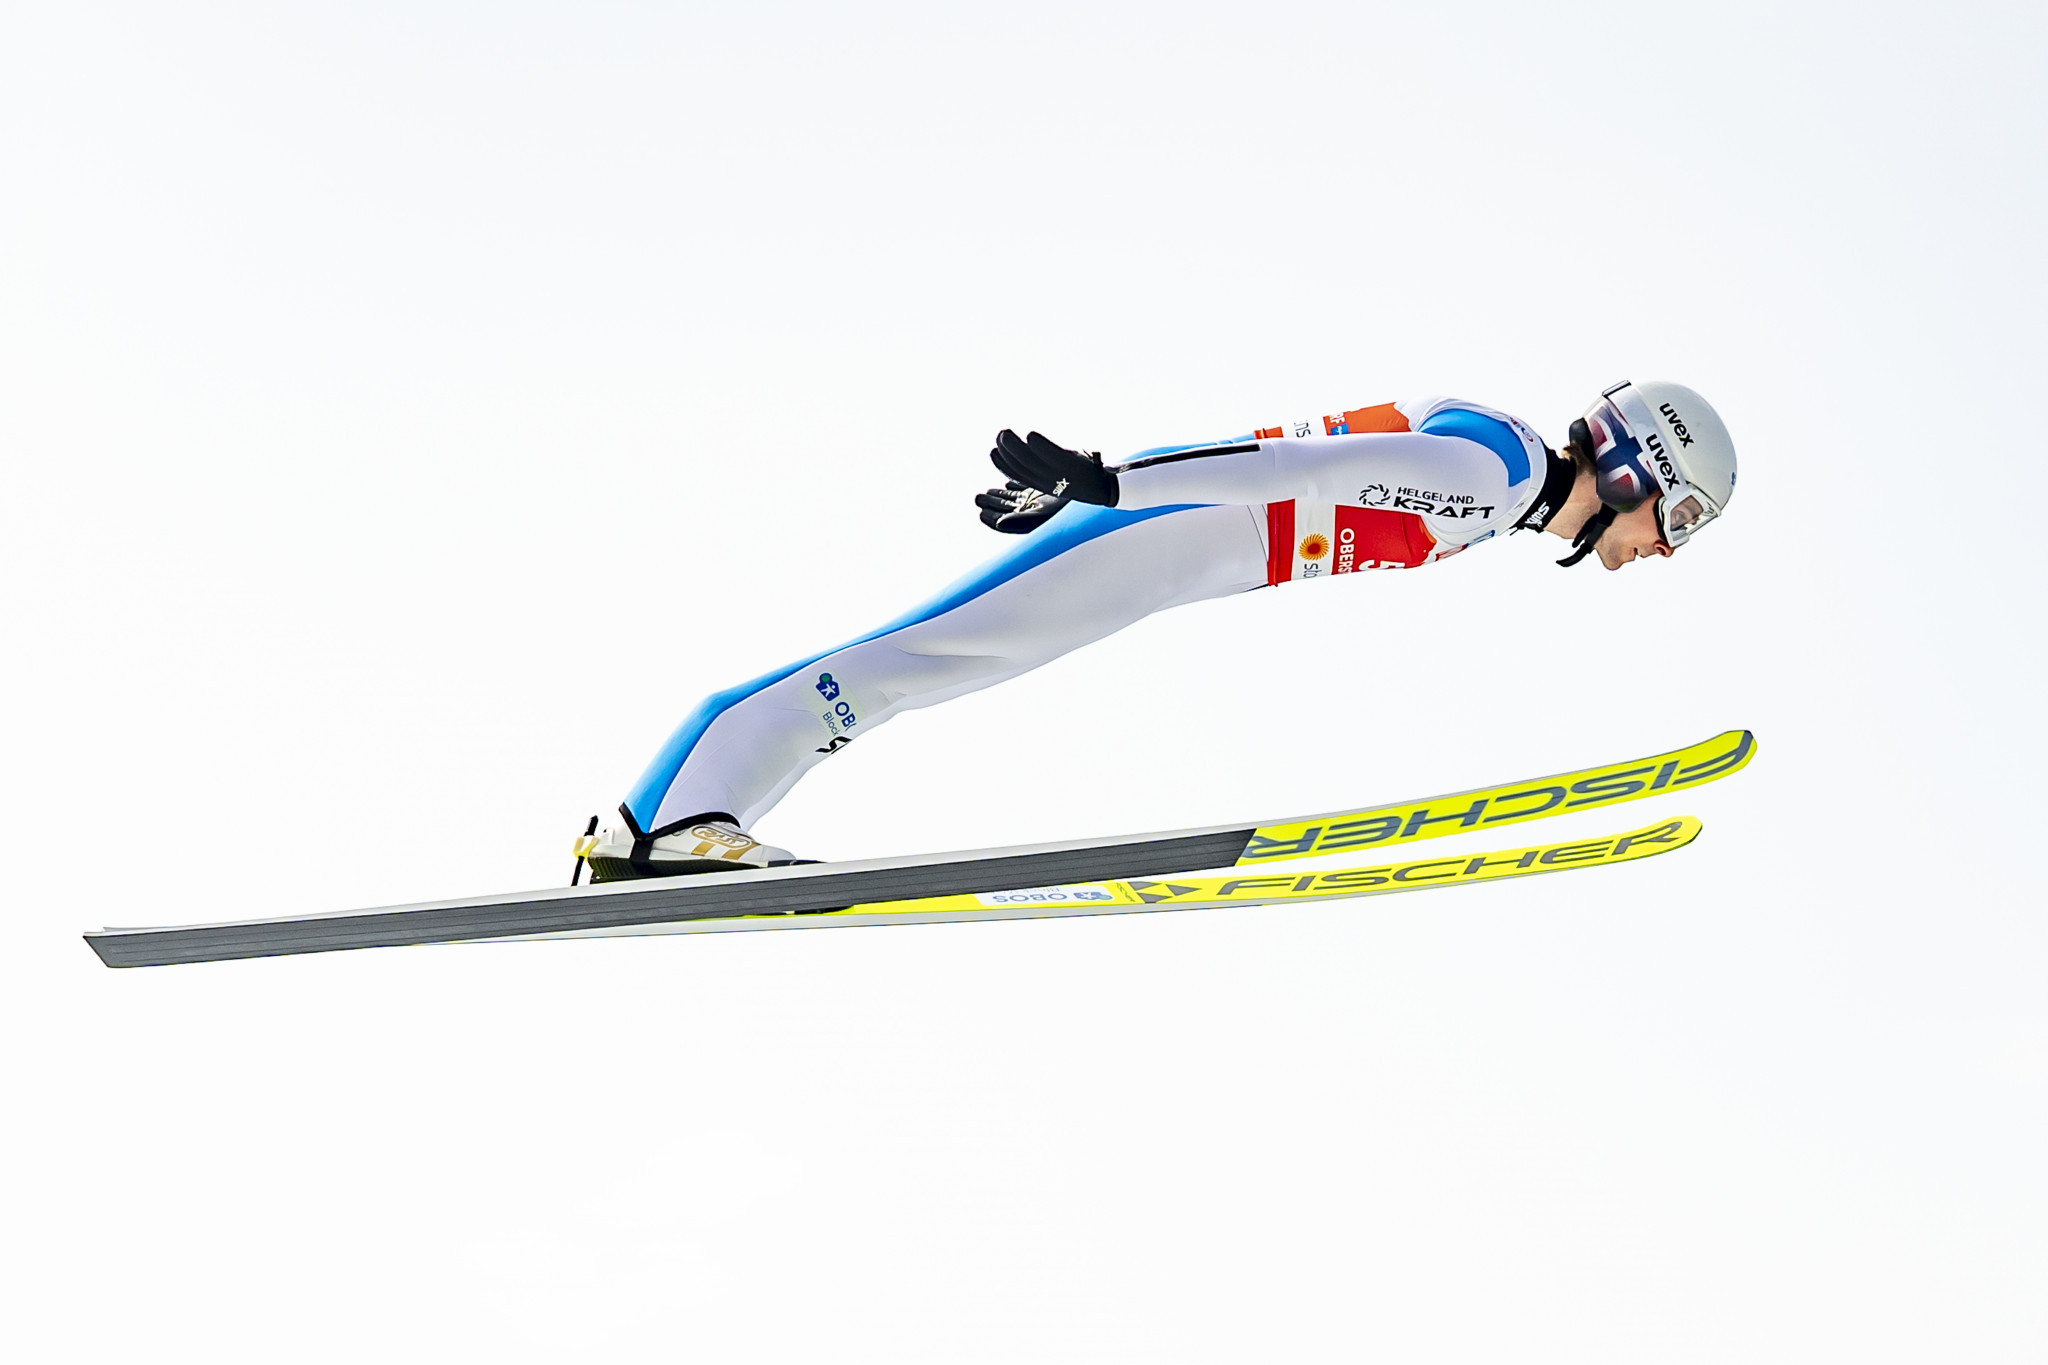 Riiber continues post-Beijing 2022 bounce back as he wins second FIS Nordic Combined World Cup in Oslo